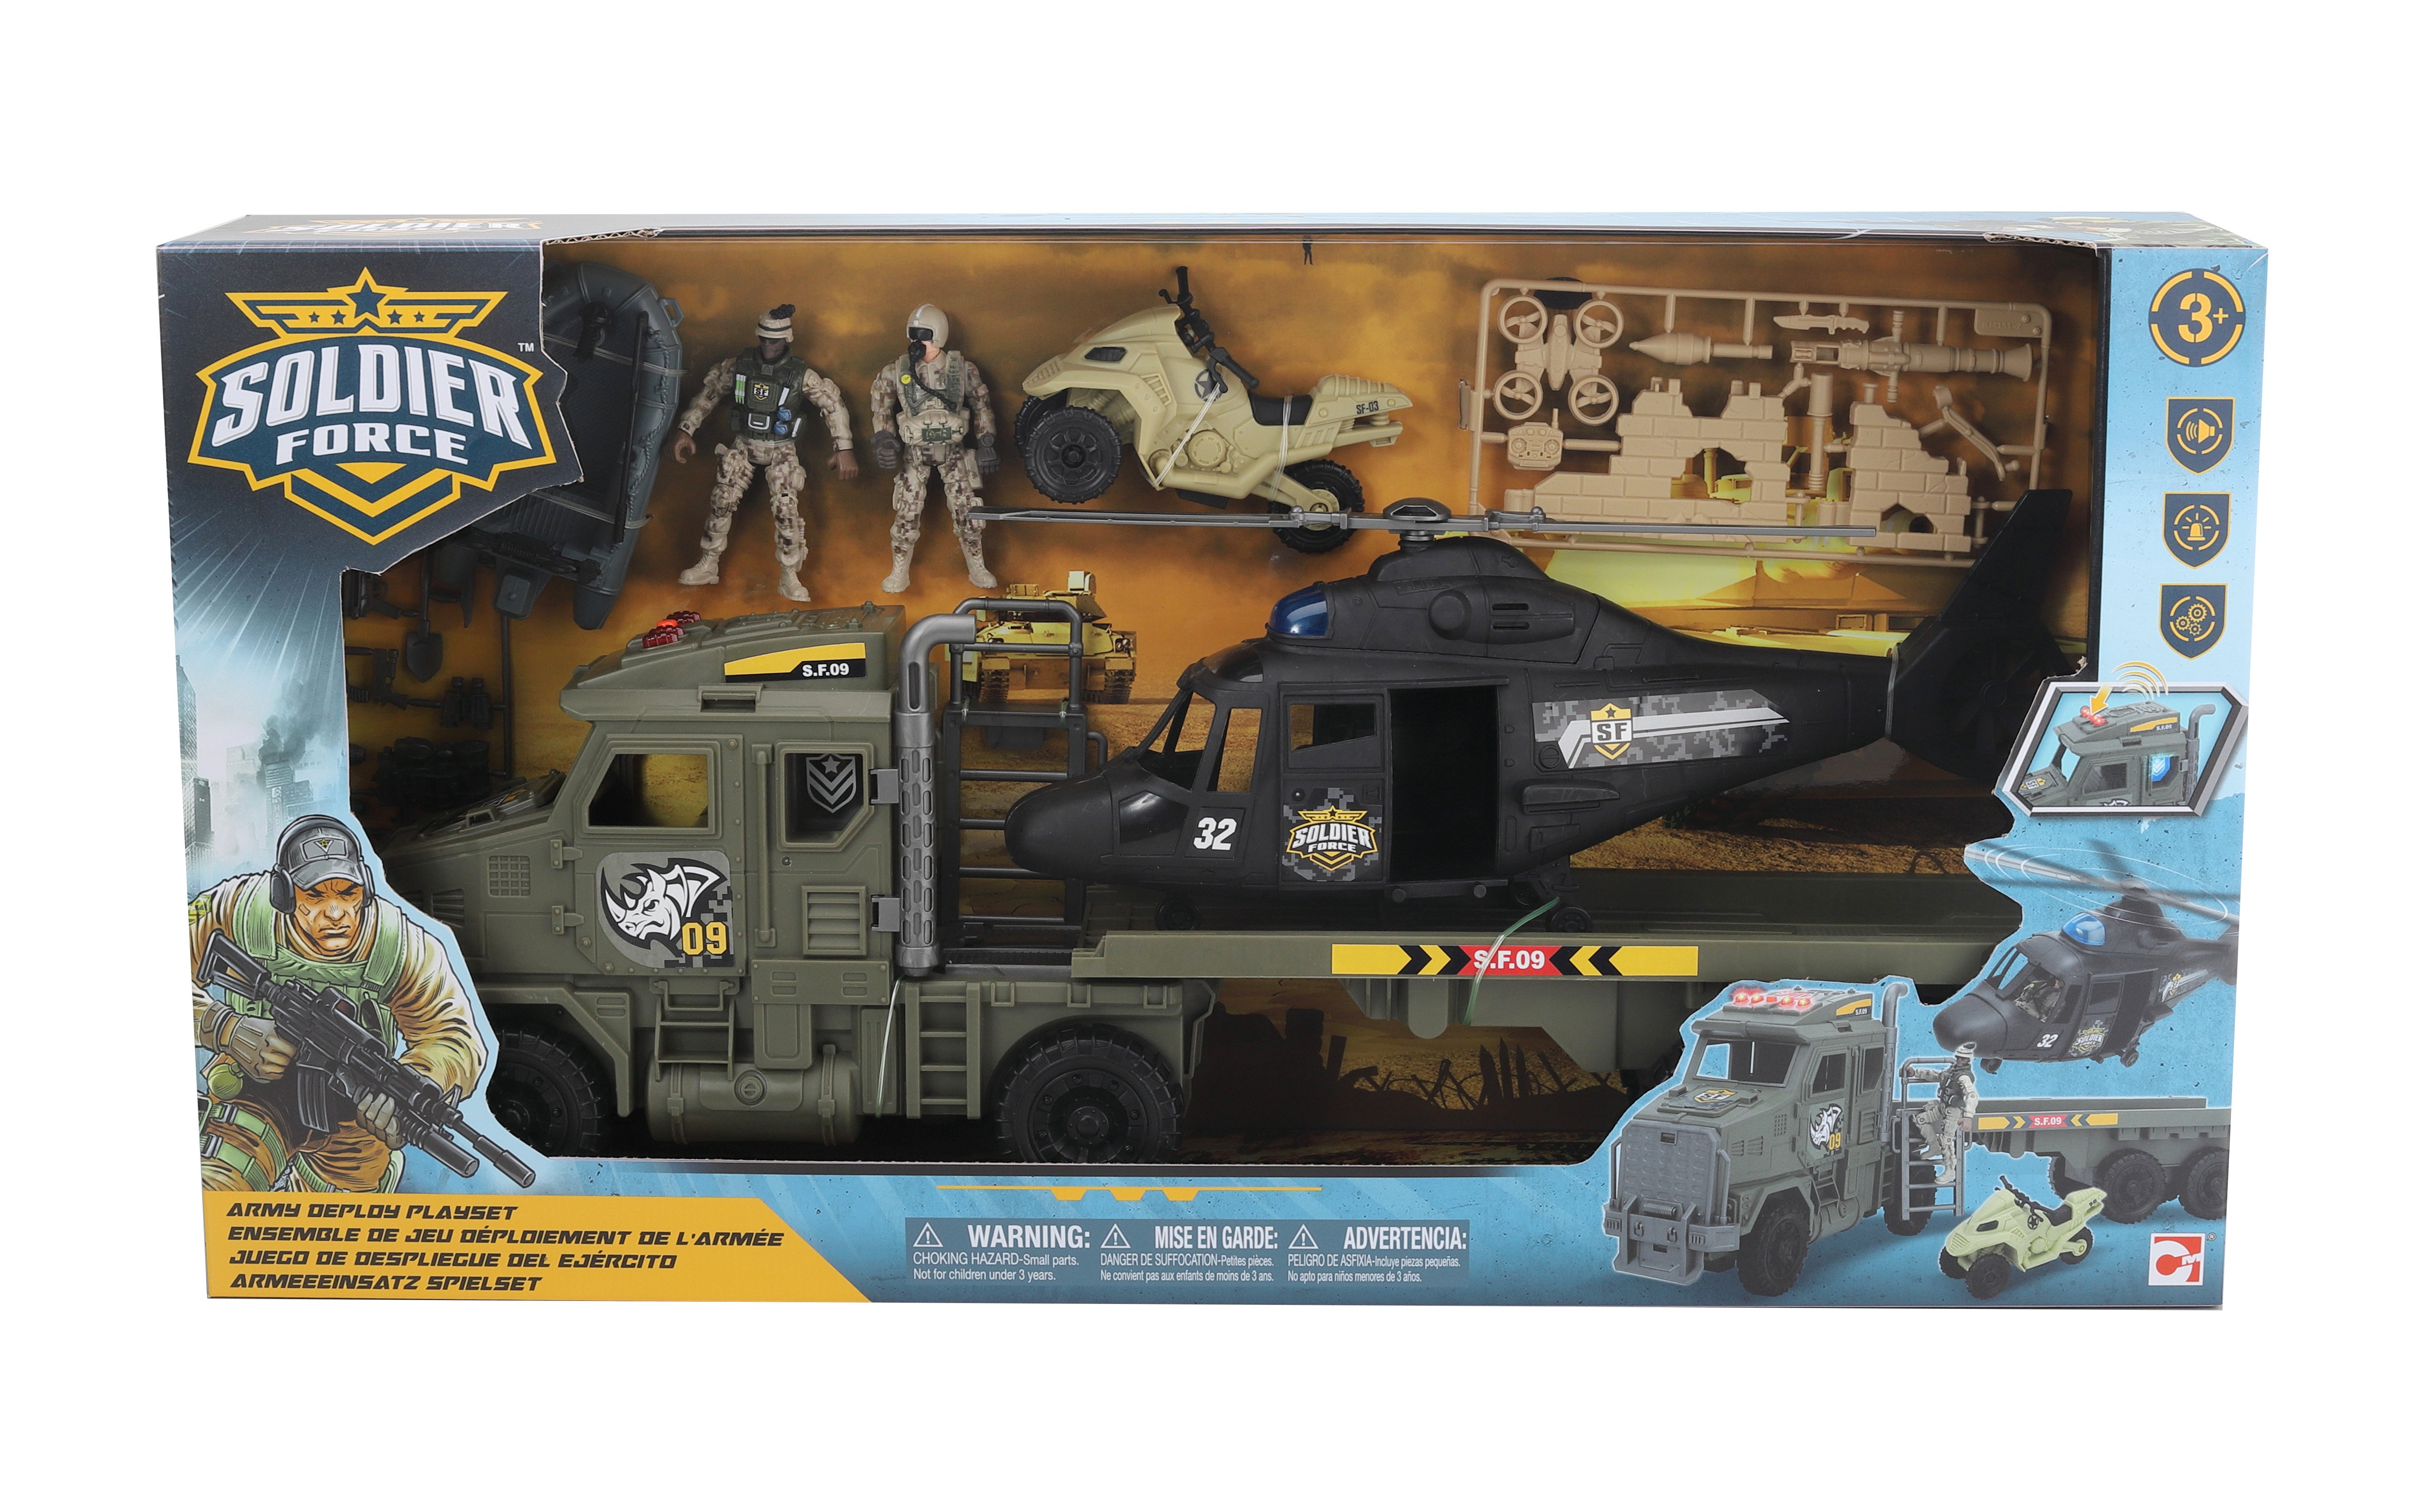 Soldier Force - Army Deploy Playset (545119)